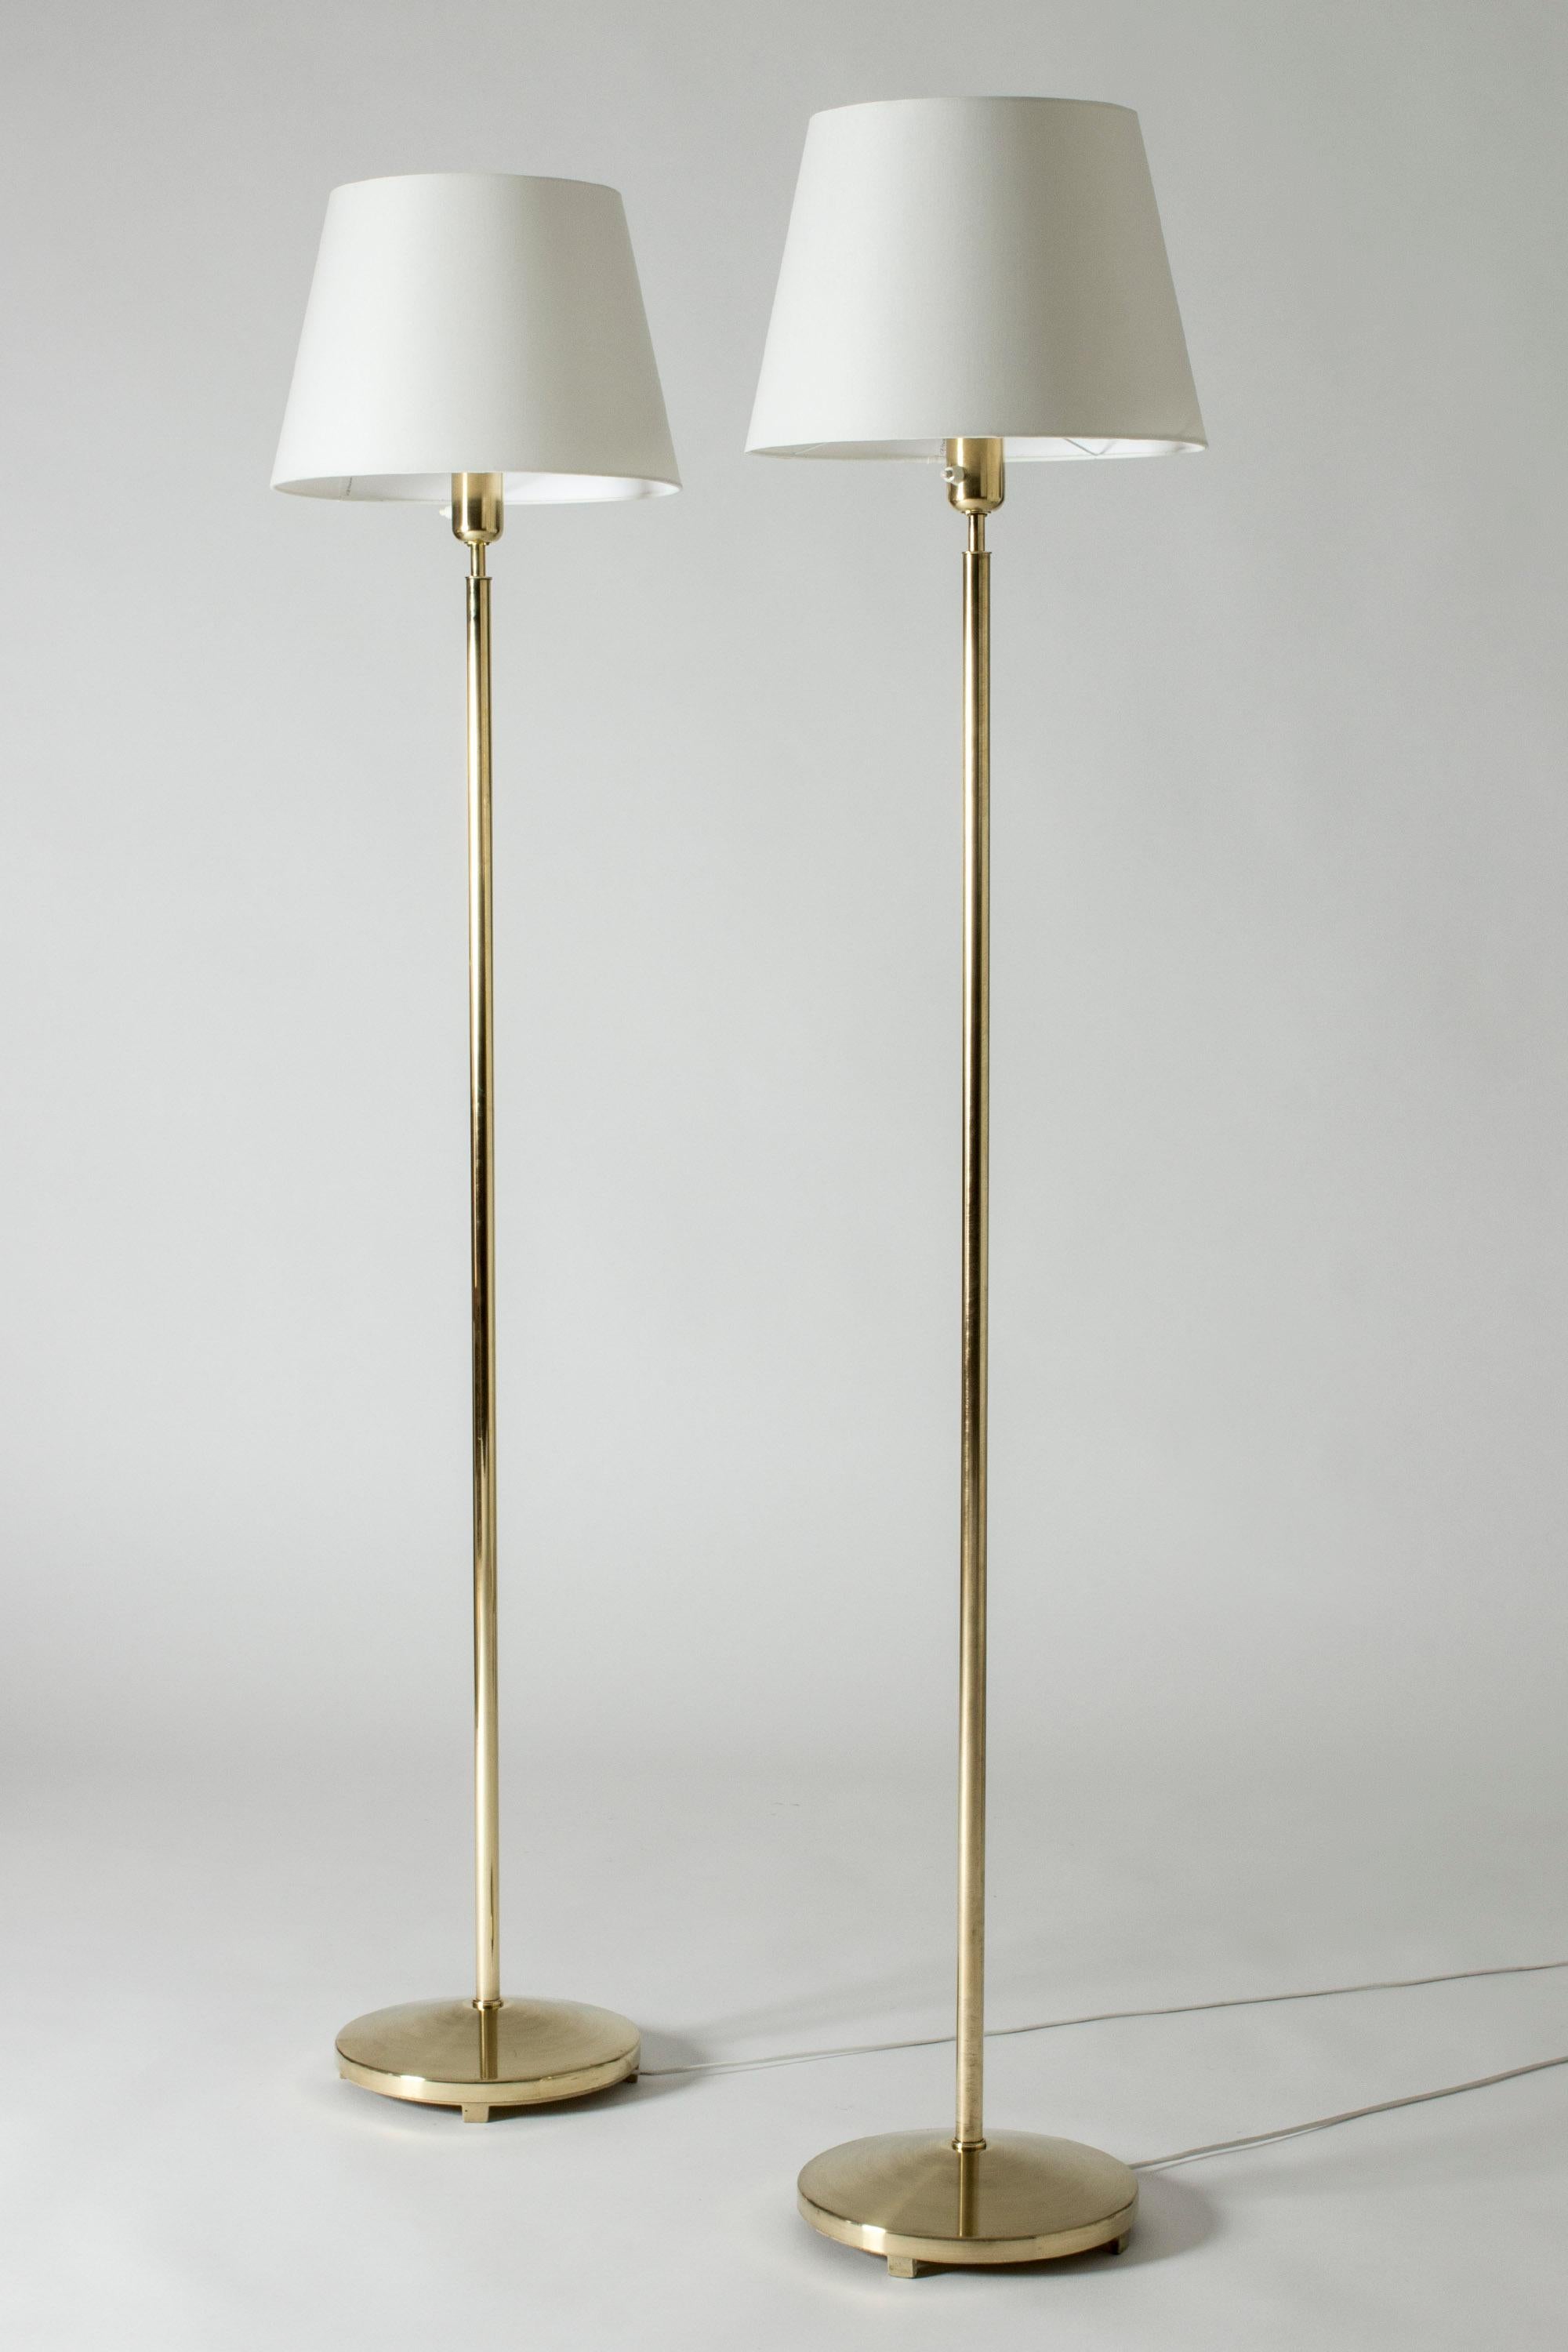 Mid-20th Century Pair of Brass Floor Lamps from ASEA, Sweden, 1950s